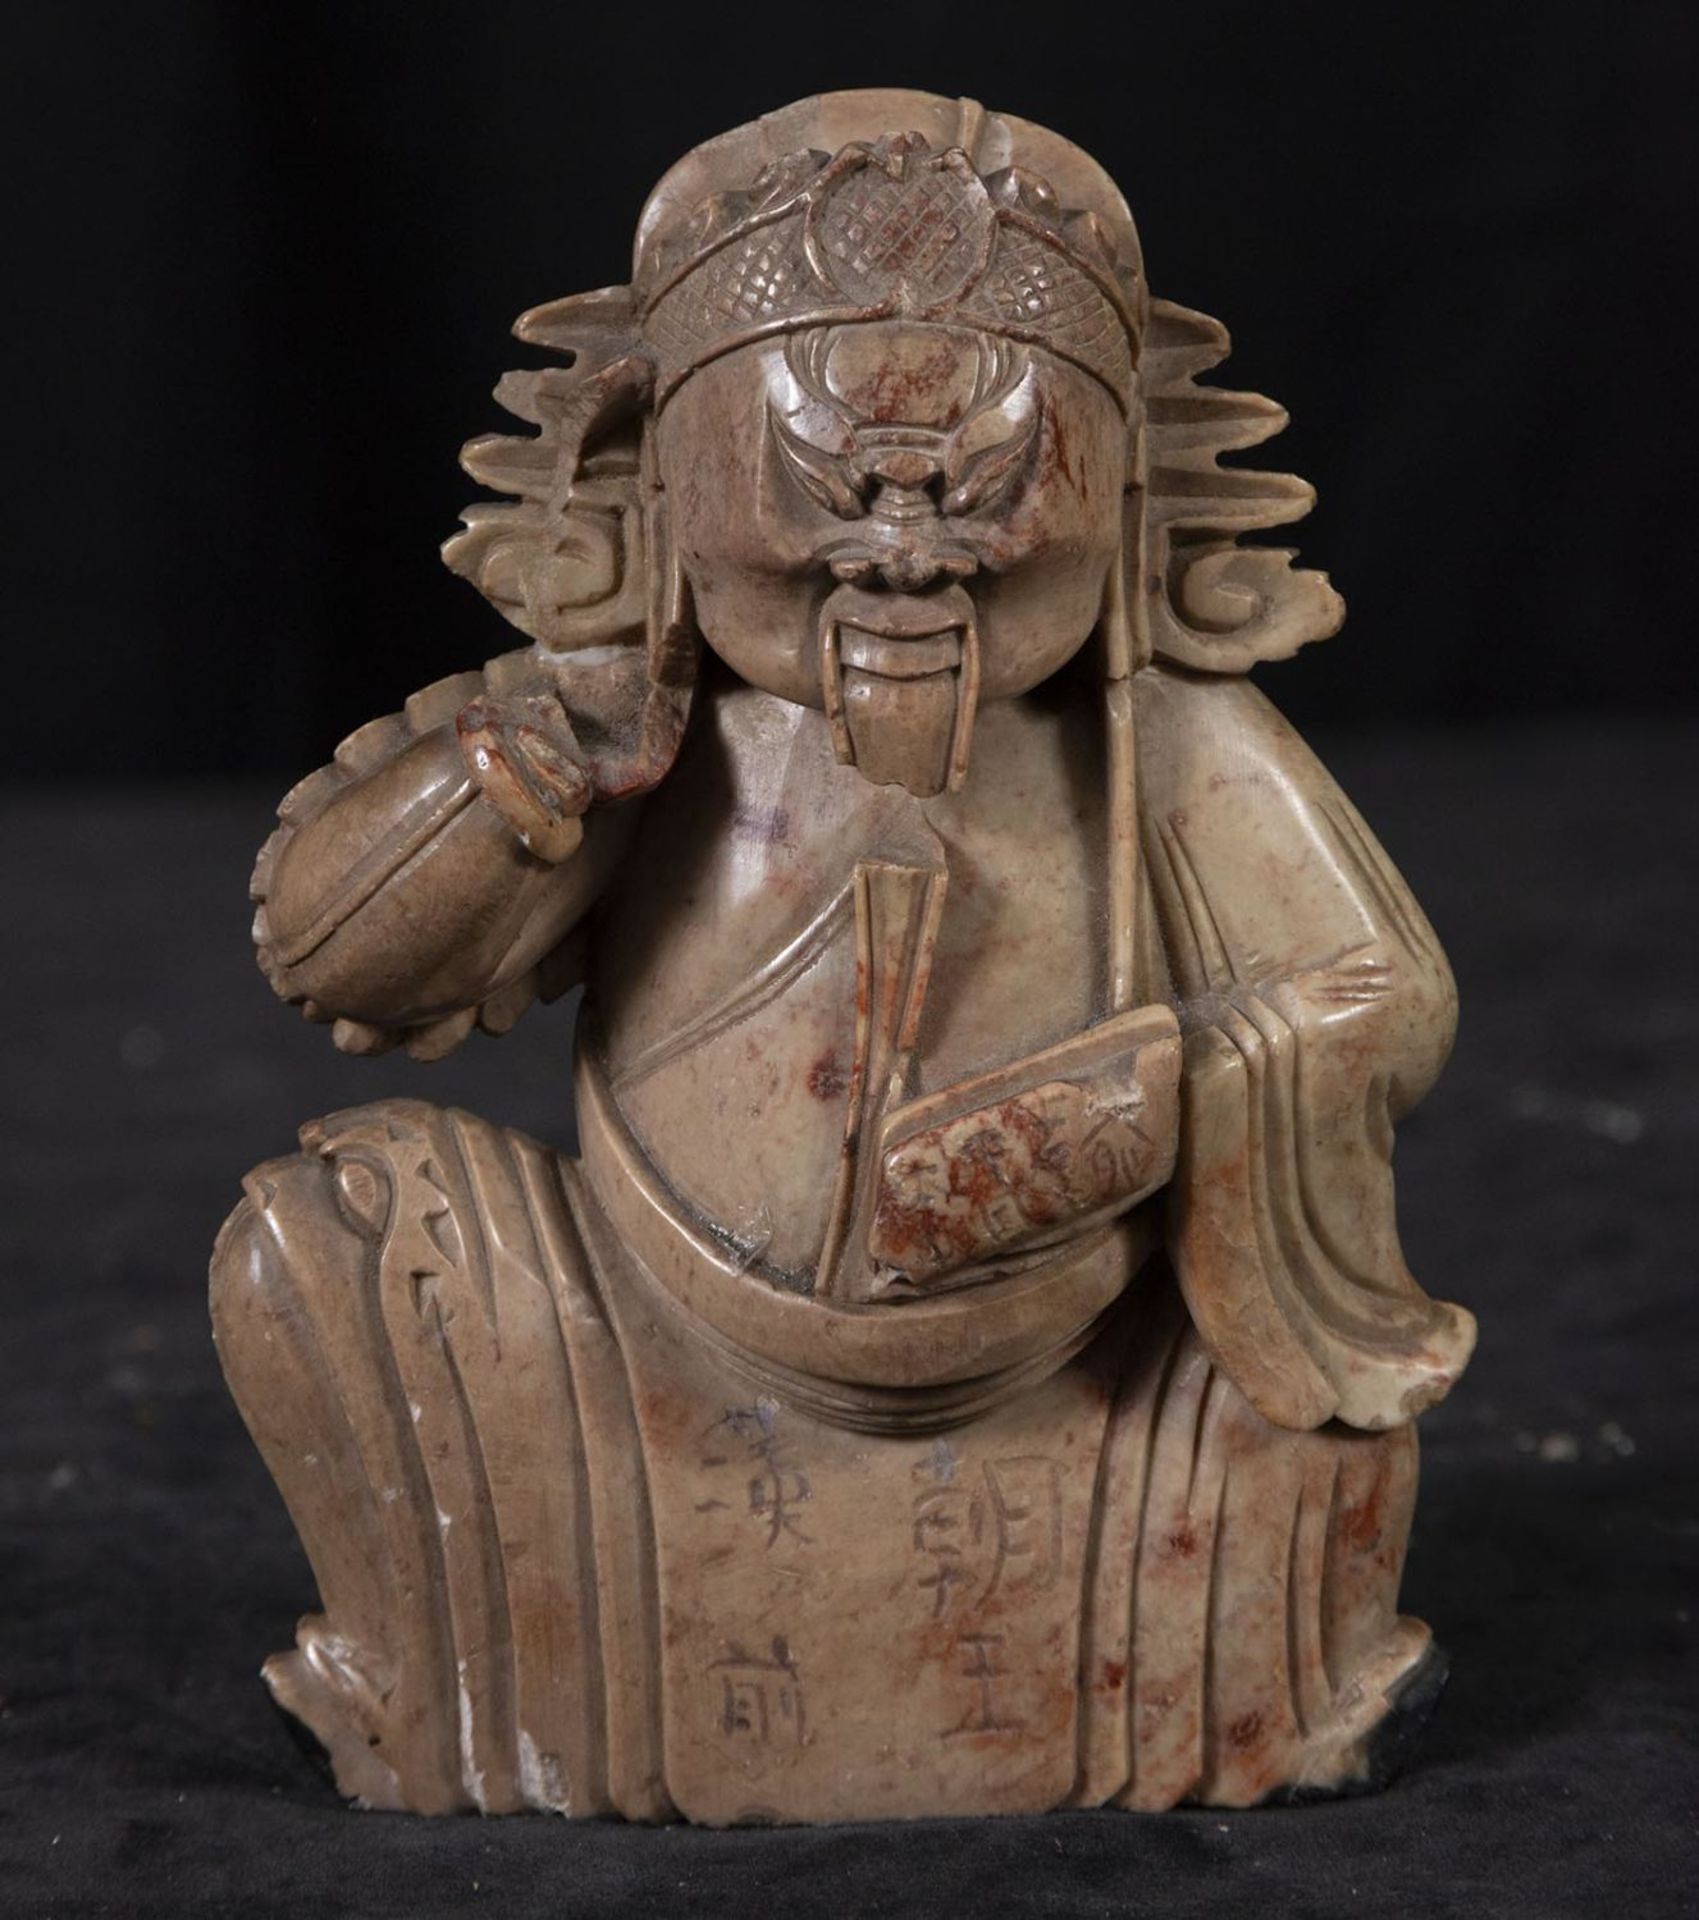 Guandi God or "God of War" Chinese in soapstone, Chinese school of the 18th century - early 19th cen